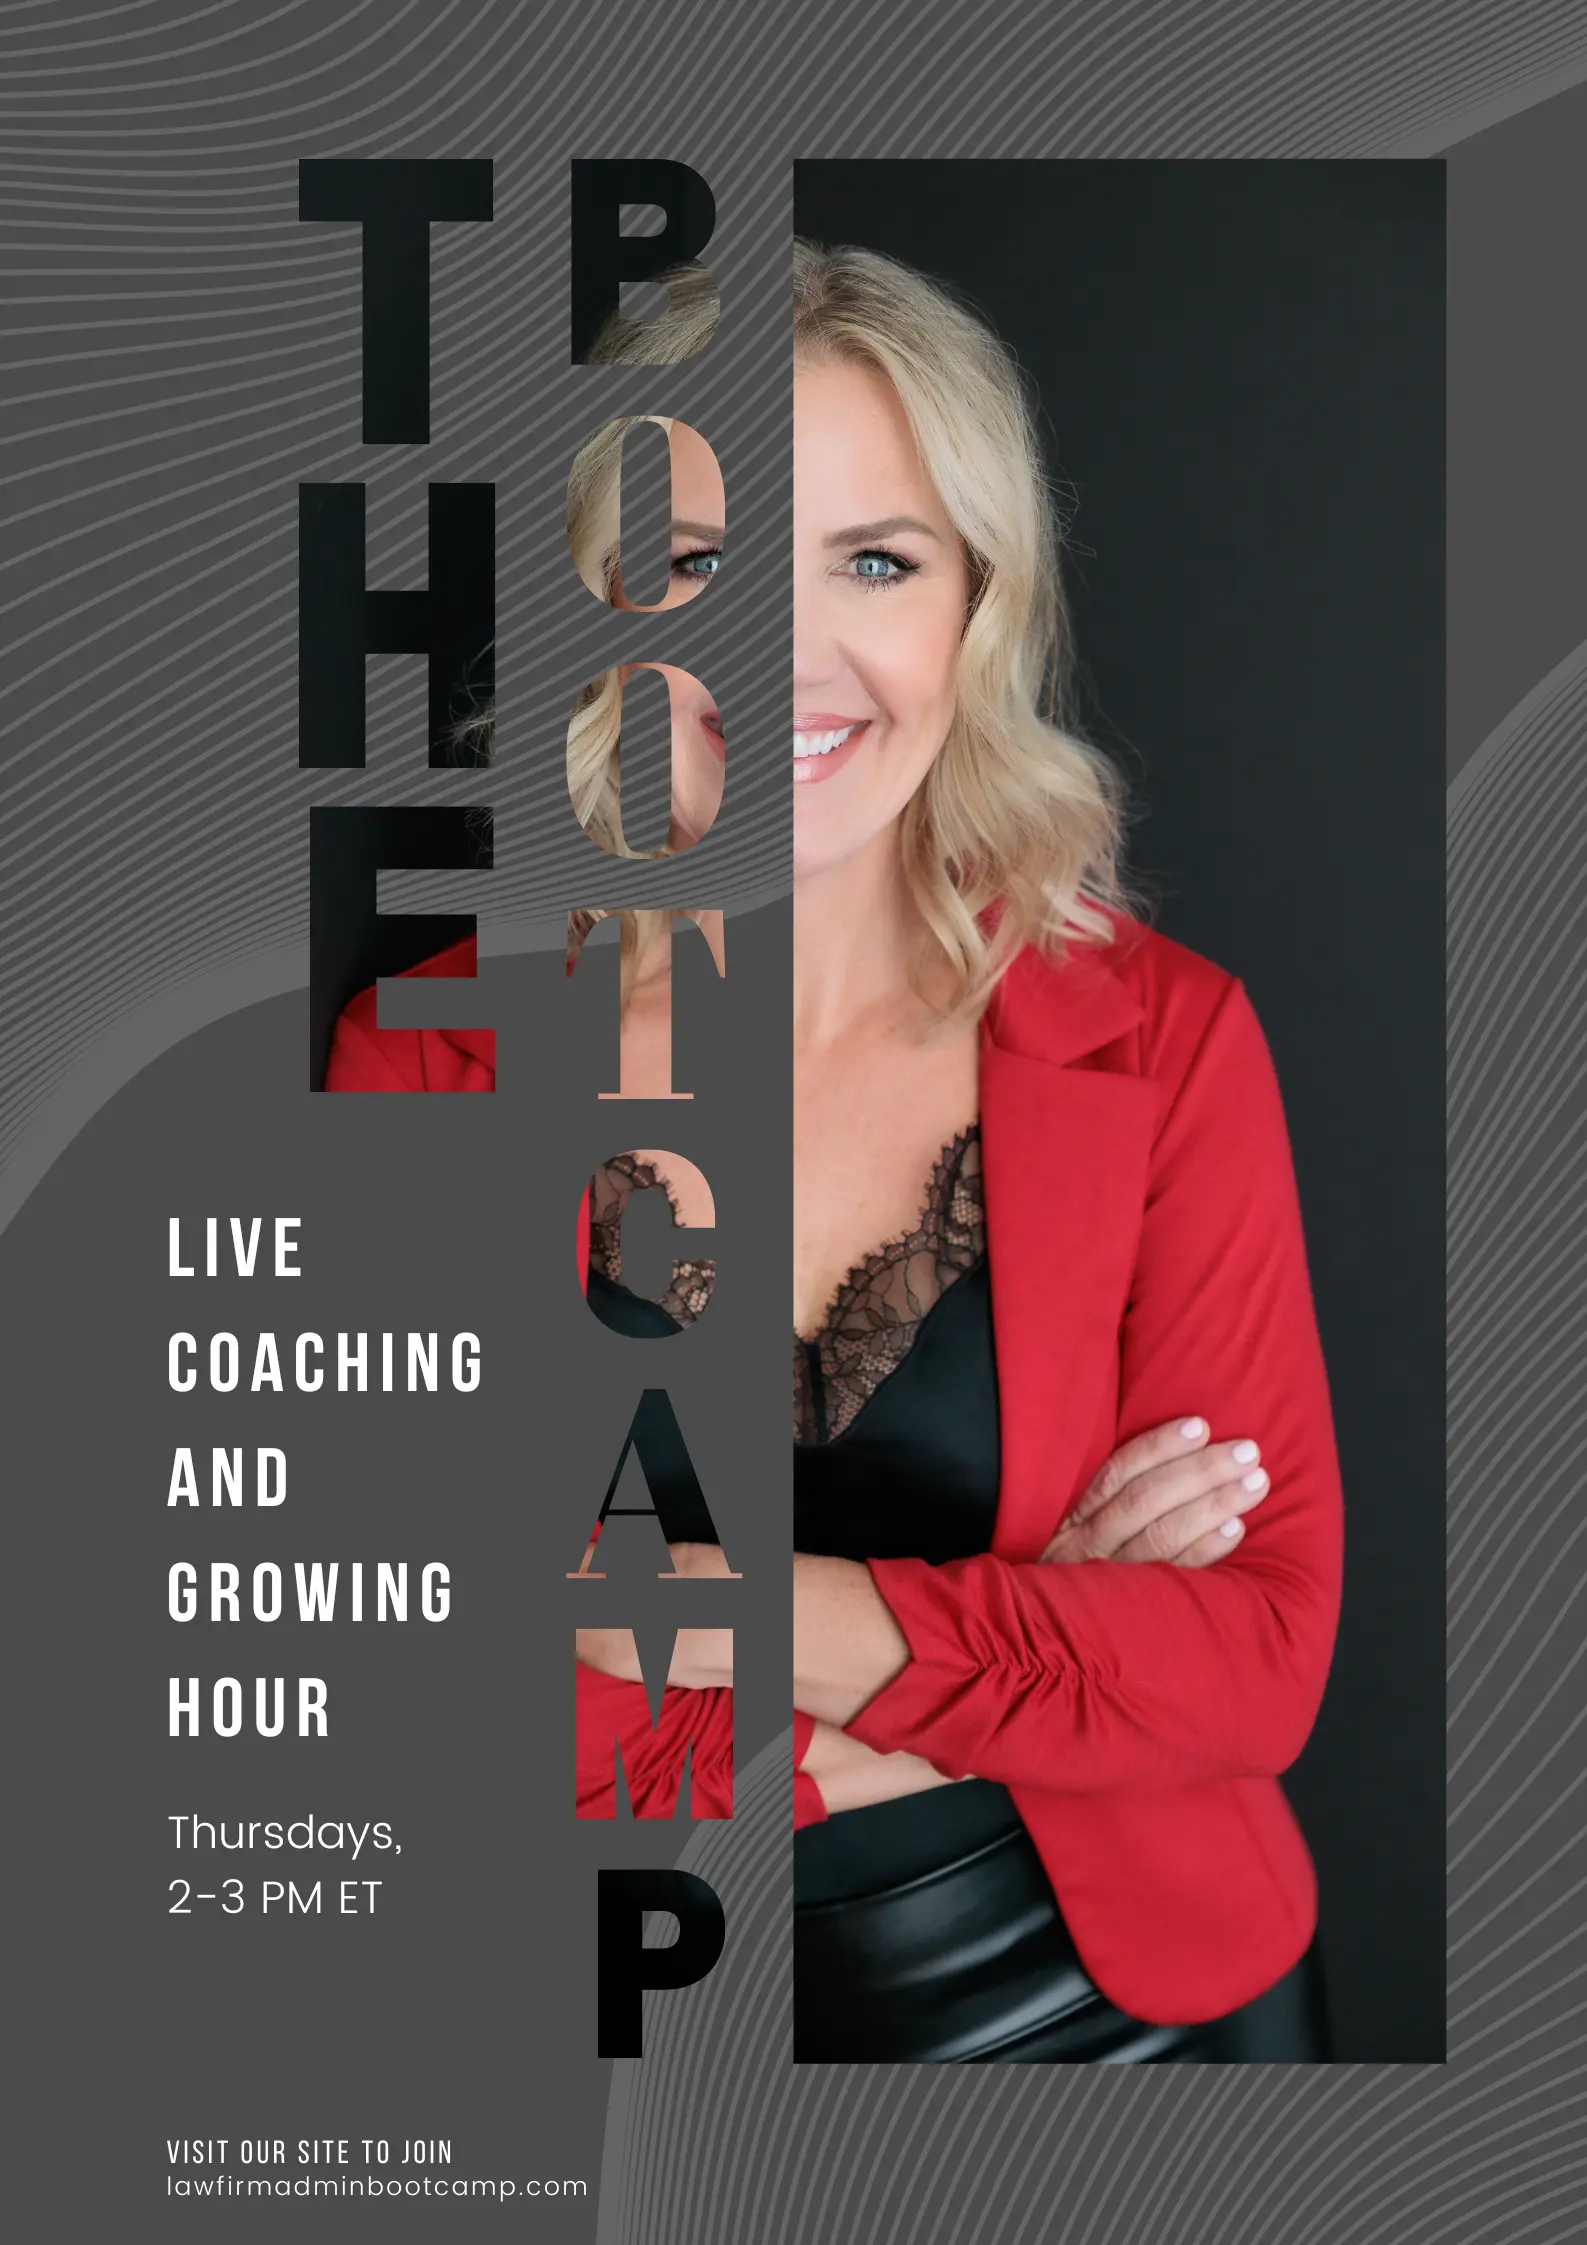 LIVE COACHING AND GROWING HOUR